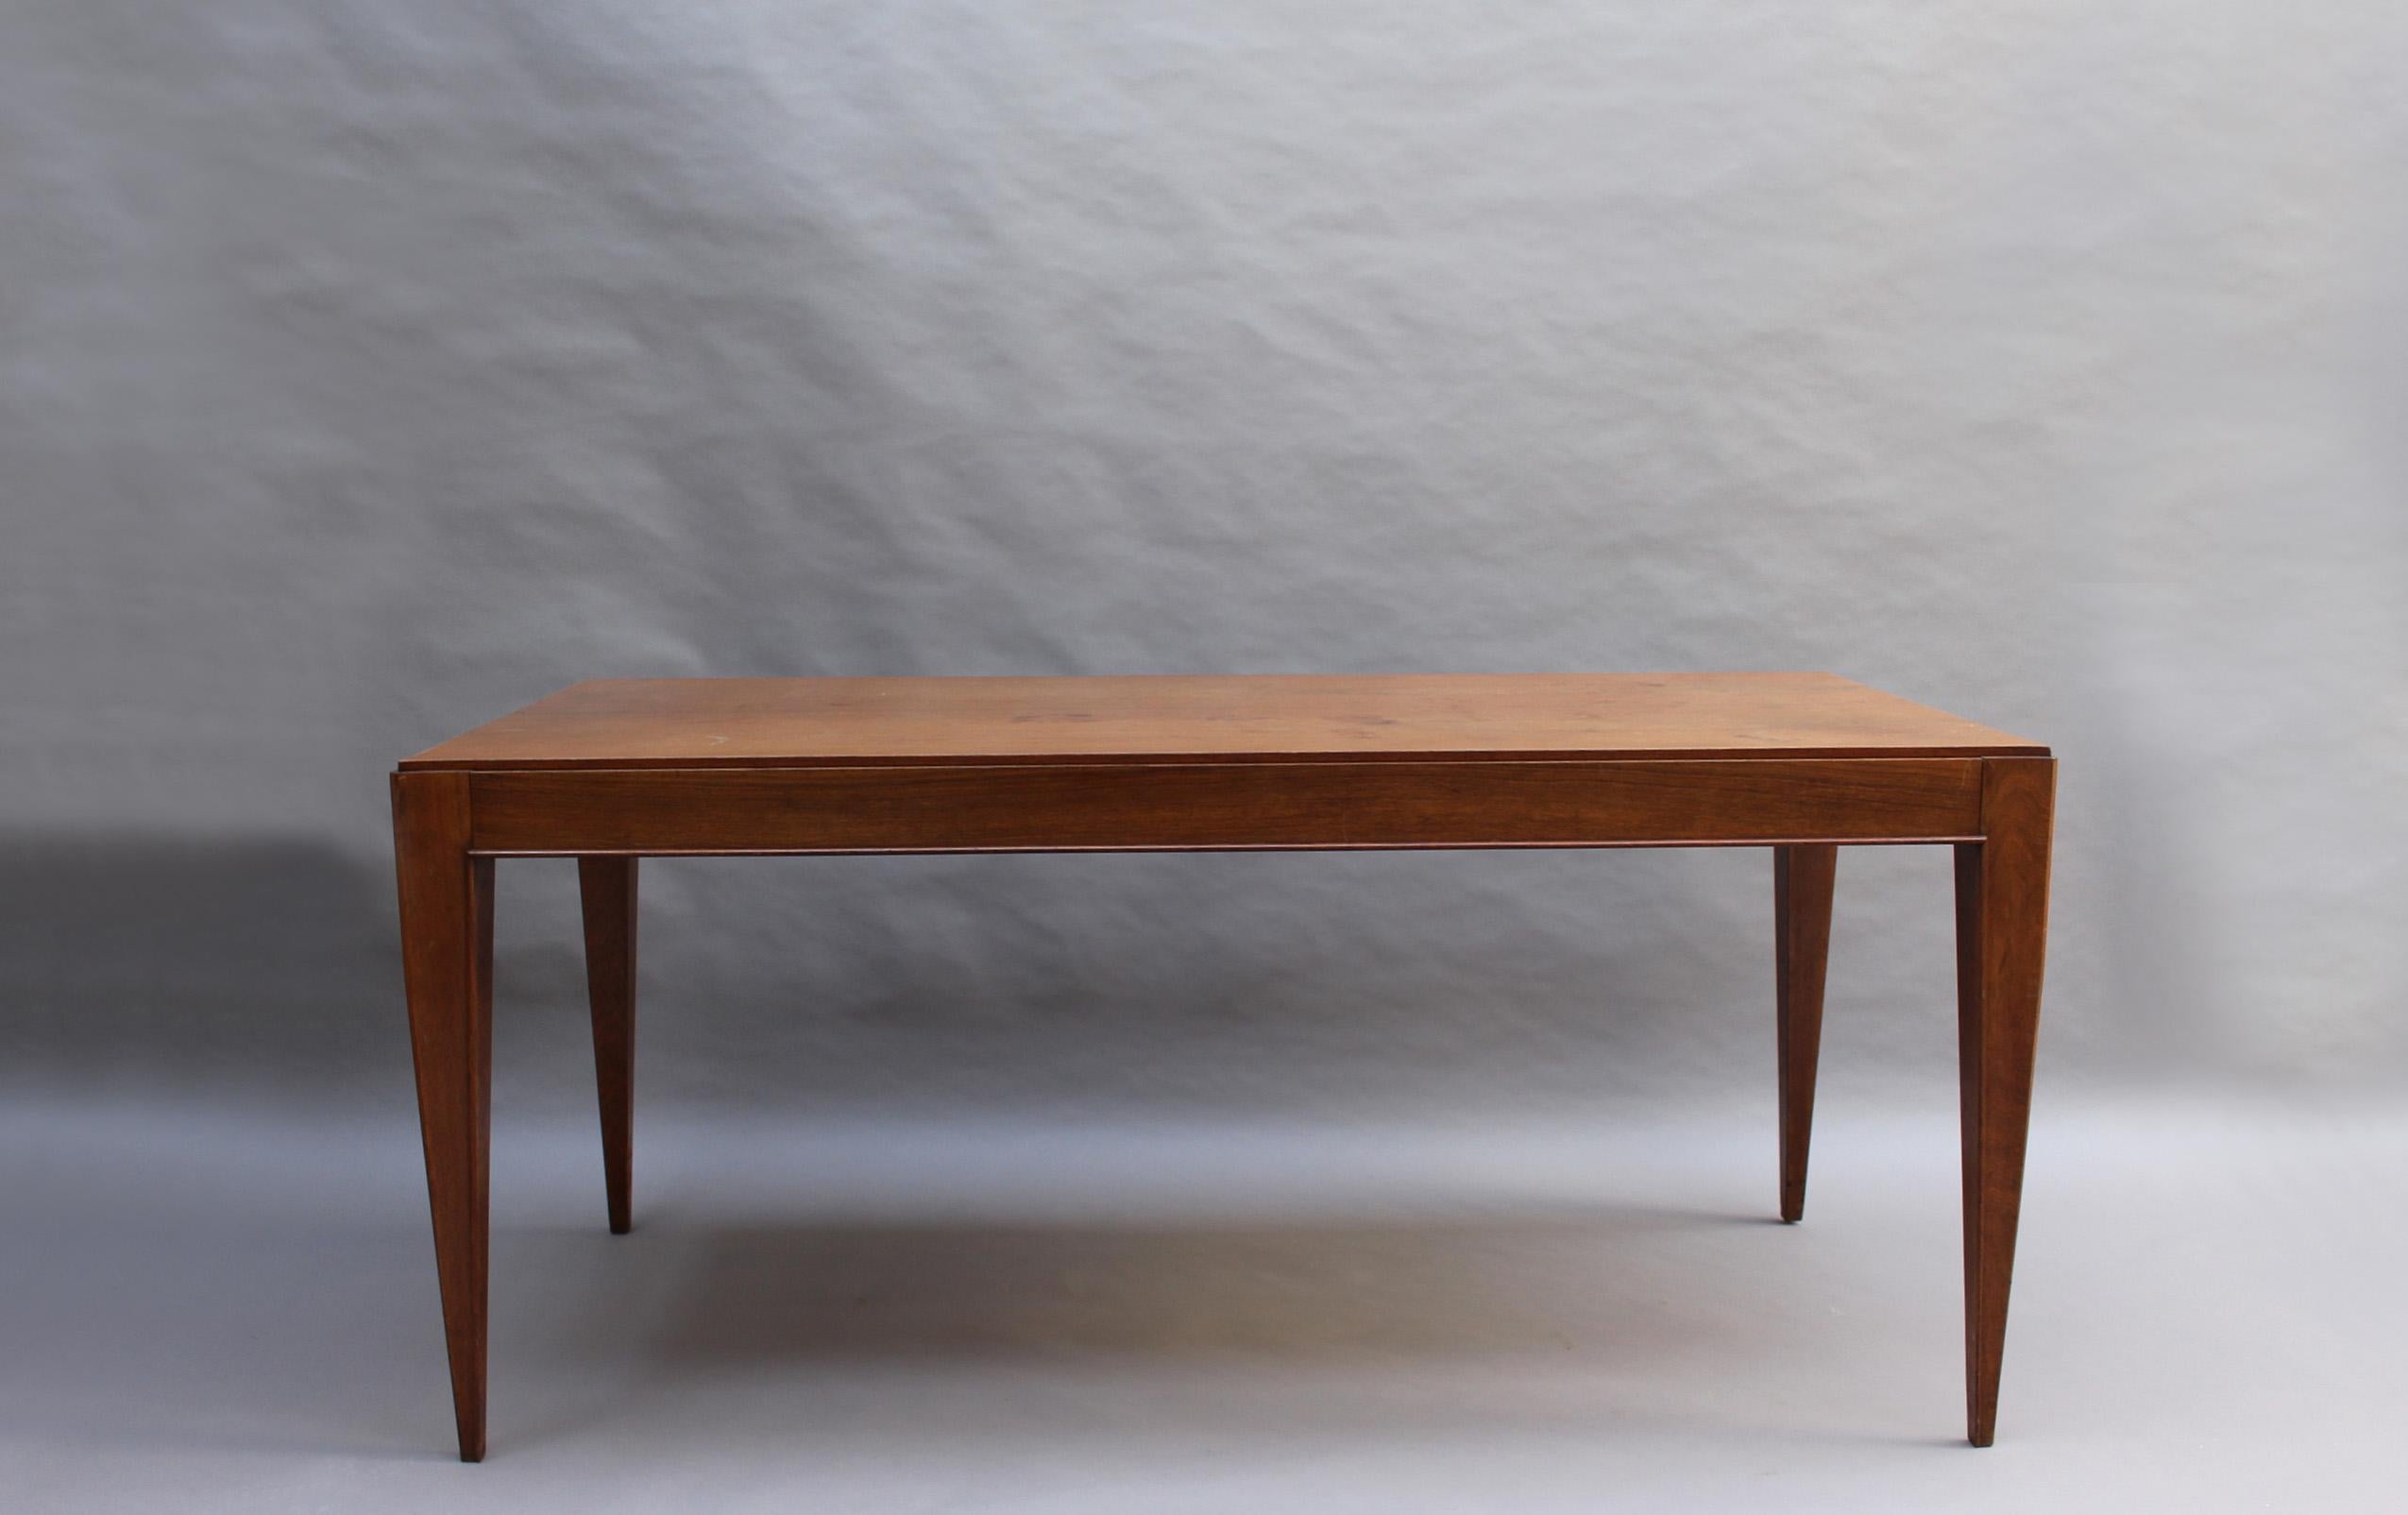 A fine French Art Deco rectangular palisander dining or writing table attributed to Dominique (André Domin & Marcel Genevrière) 
Provenance: Lazard bank in Paris.